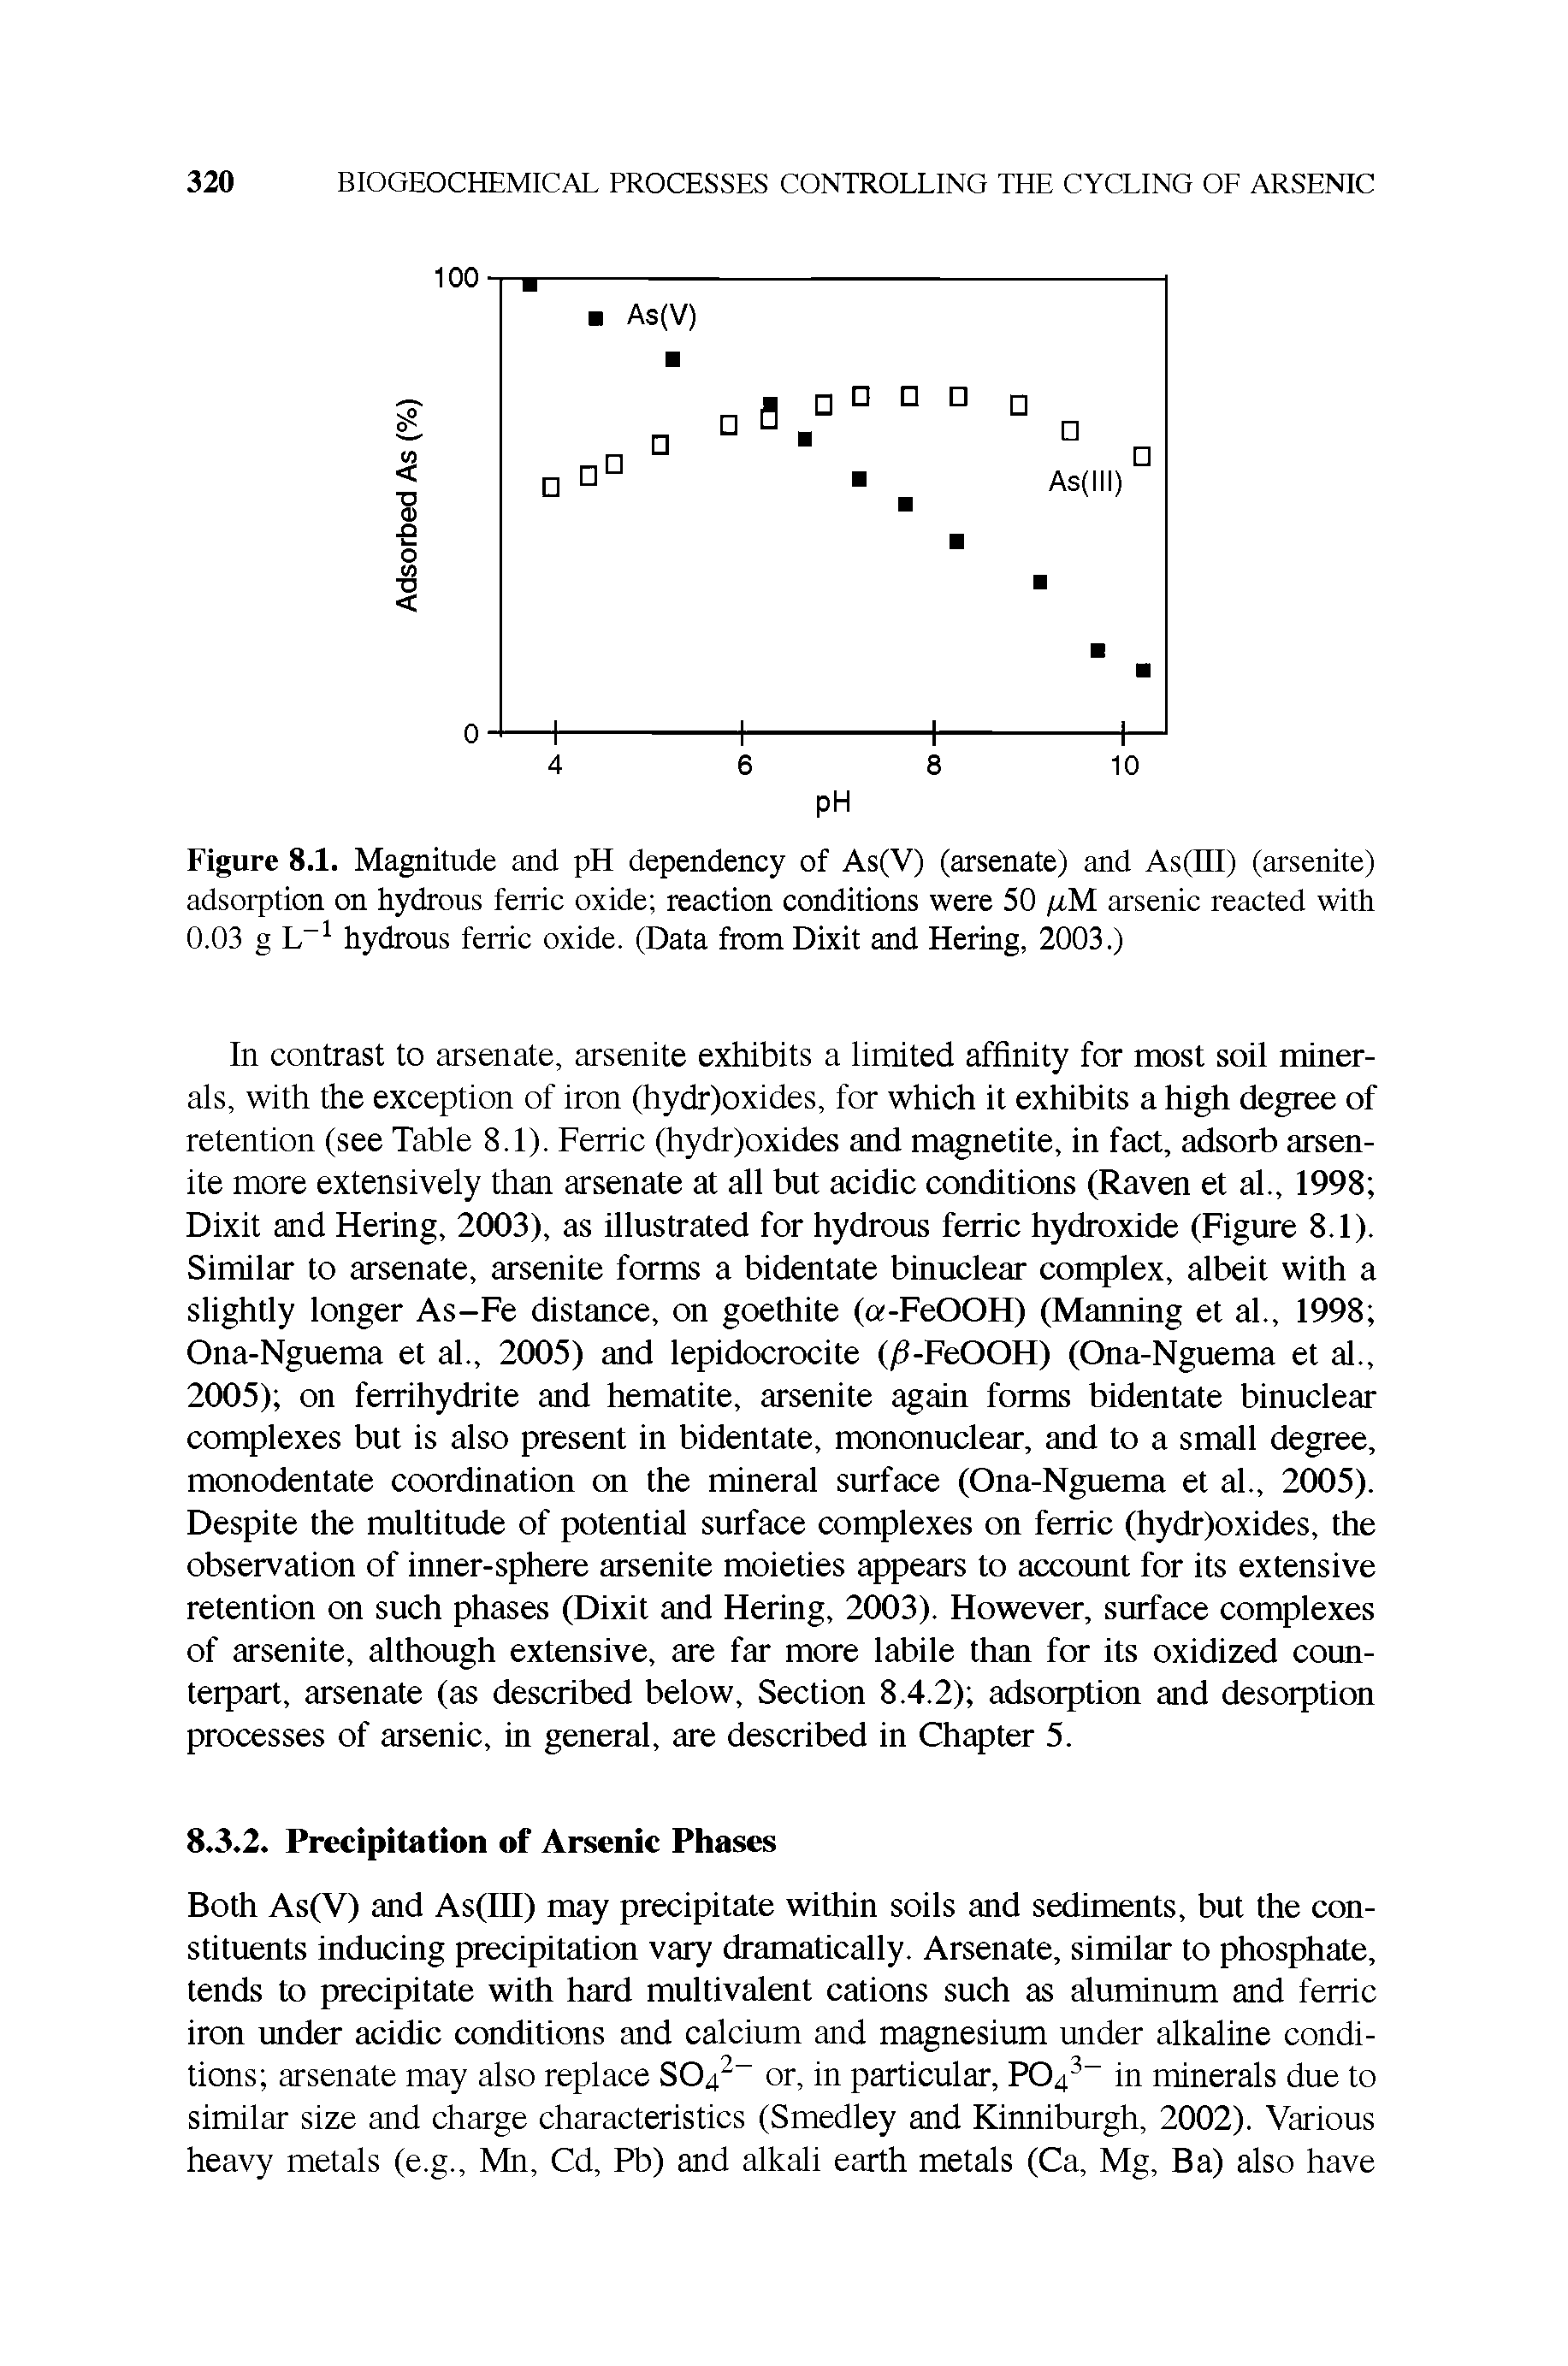 Figure 8.1. Magnitude and pH dependency of As(V) (arsenate) and As(ni) (arsenite) adsorption on hydrous ferric oxide reaction conditions were 50 /xM arsenic reacted with 0.03 g hydrous ferric oxide. (Data from Dixit and Hering, 2003.)...